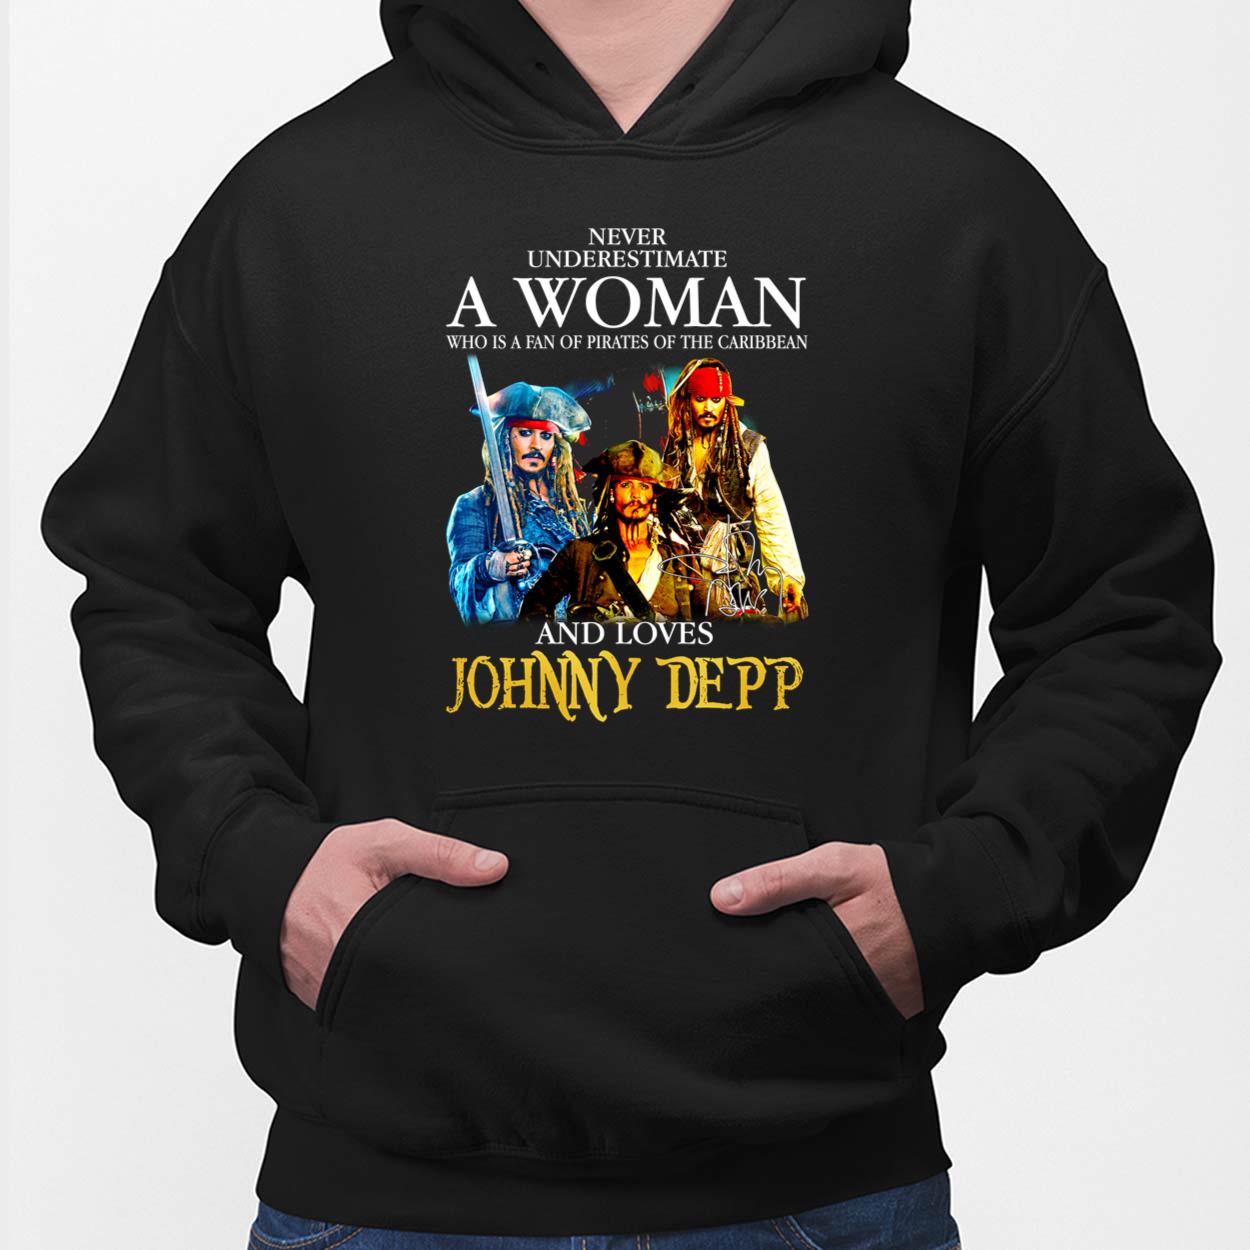 Never Underestimate Who Is A Fan Of Pirates Of The Caribbean And Loves  Johnny Depp Shirt, Hoodie, Sweatshirt, Women Tee - Lelemoon